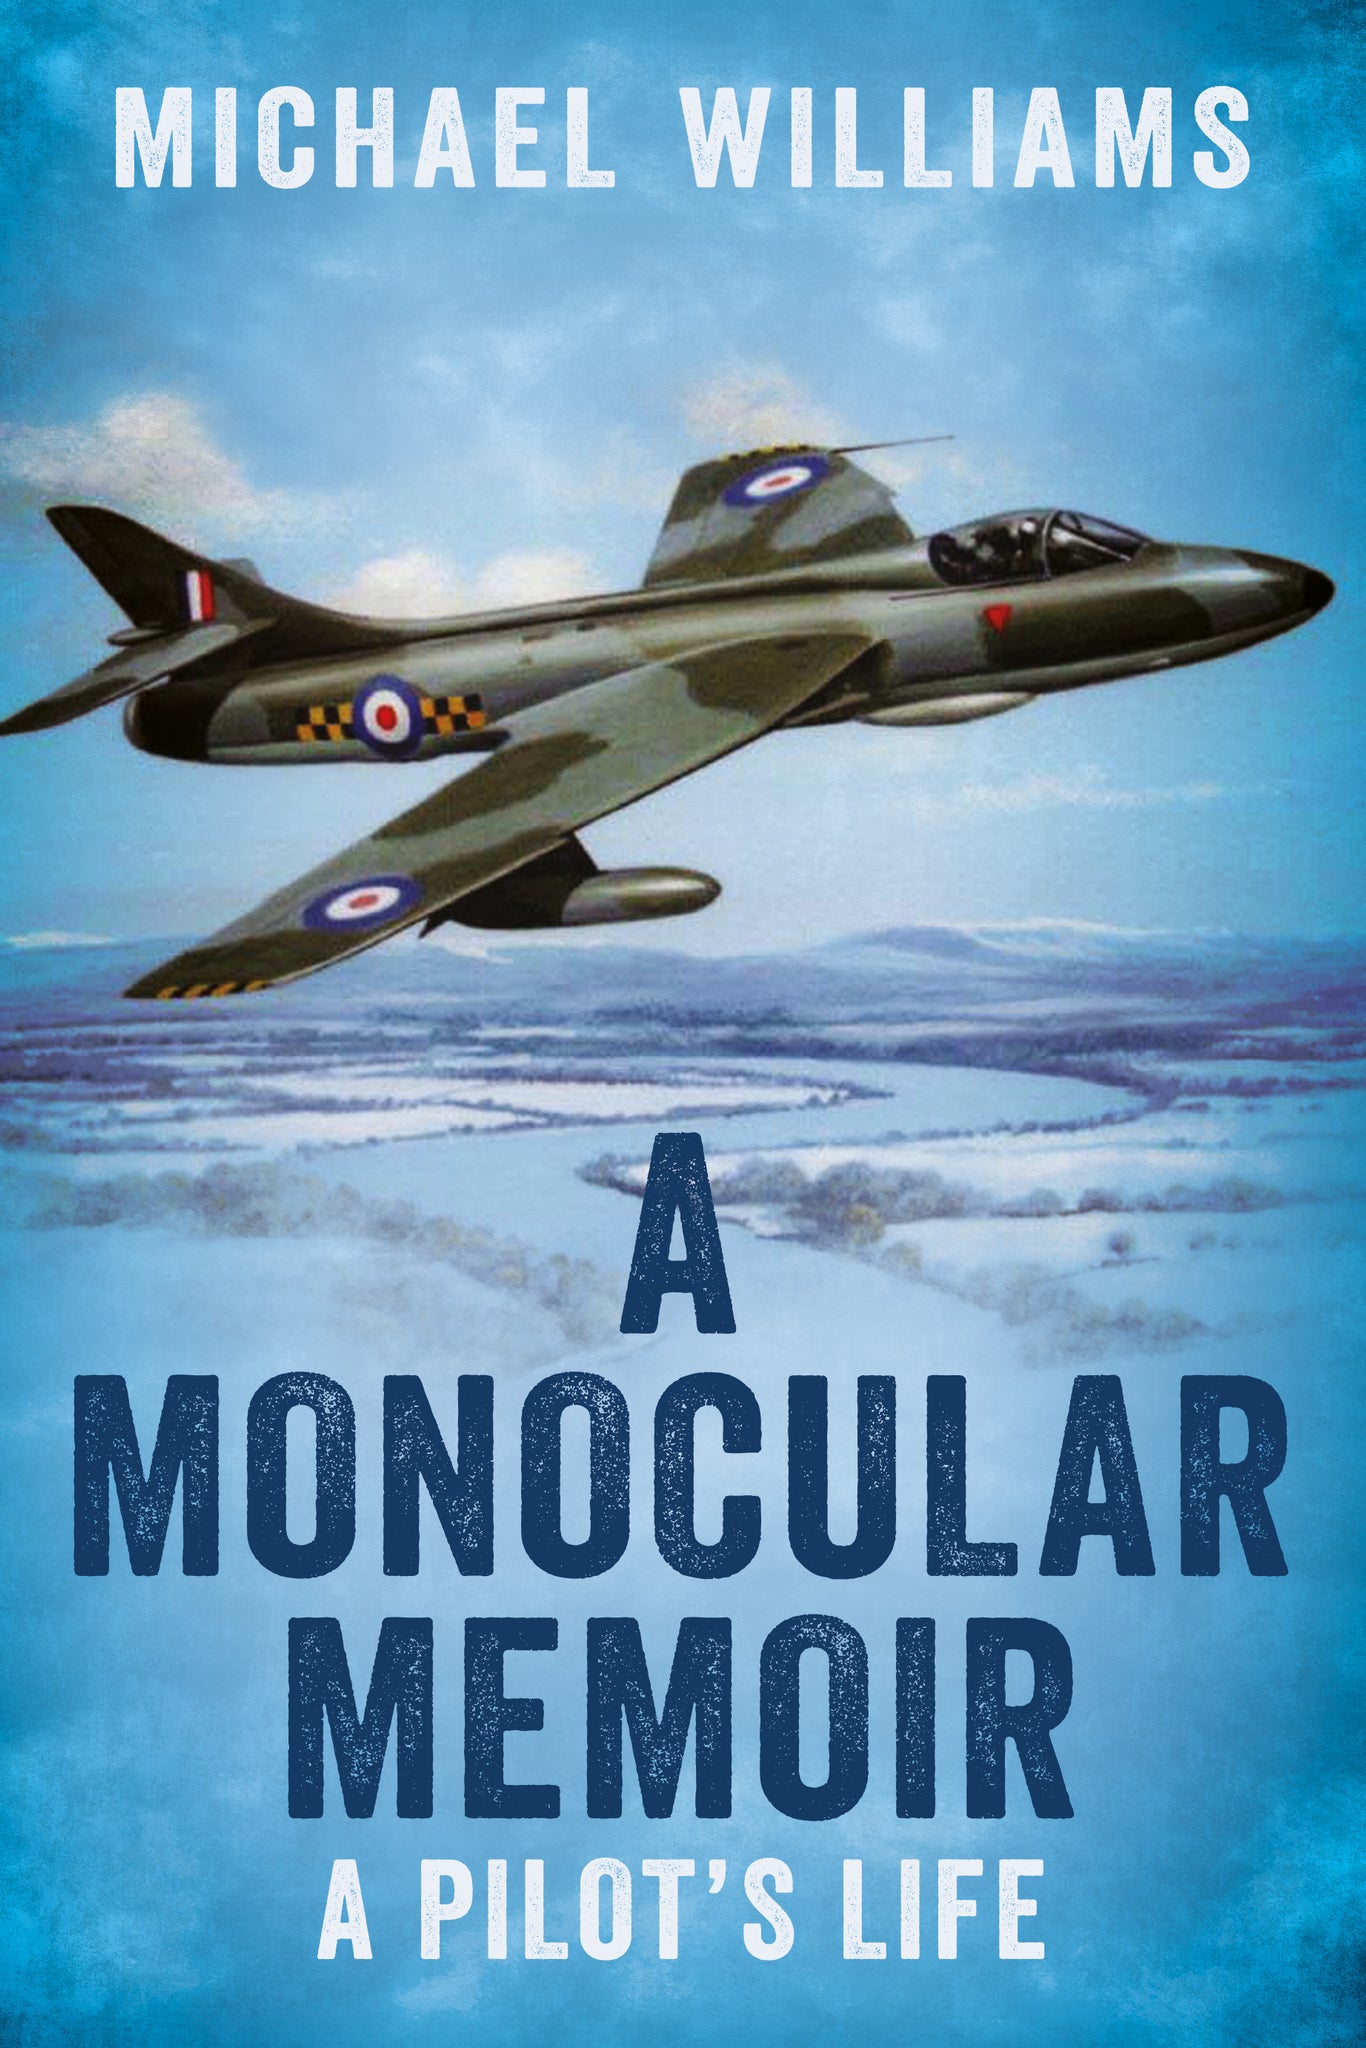 A Monocular Memoir: A Pilot's Life - available now from Fonthill Media